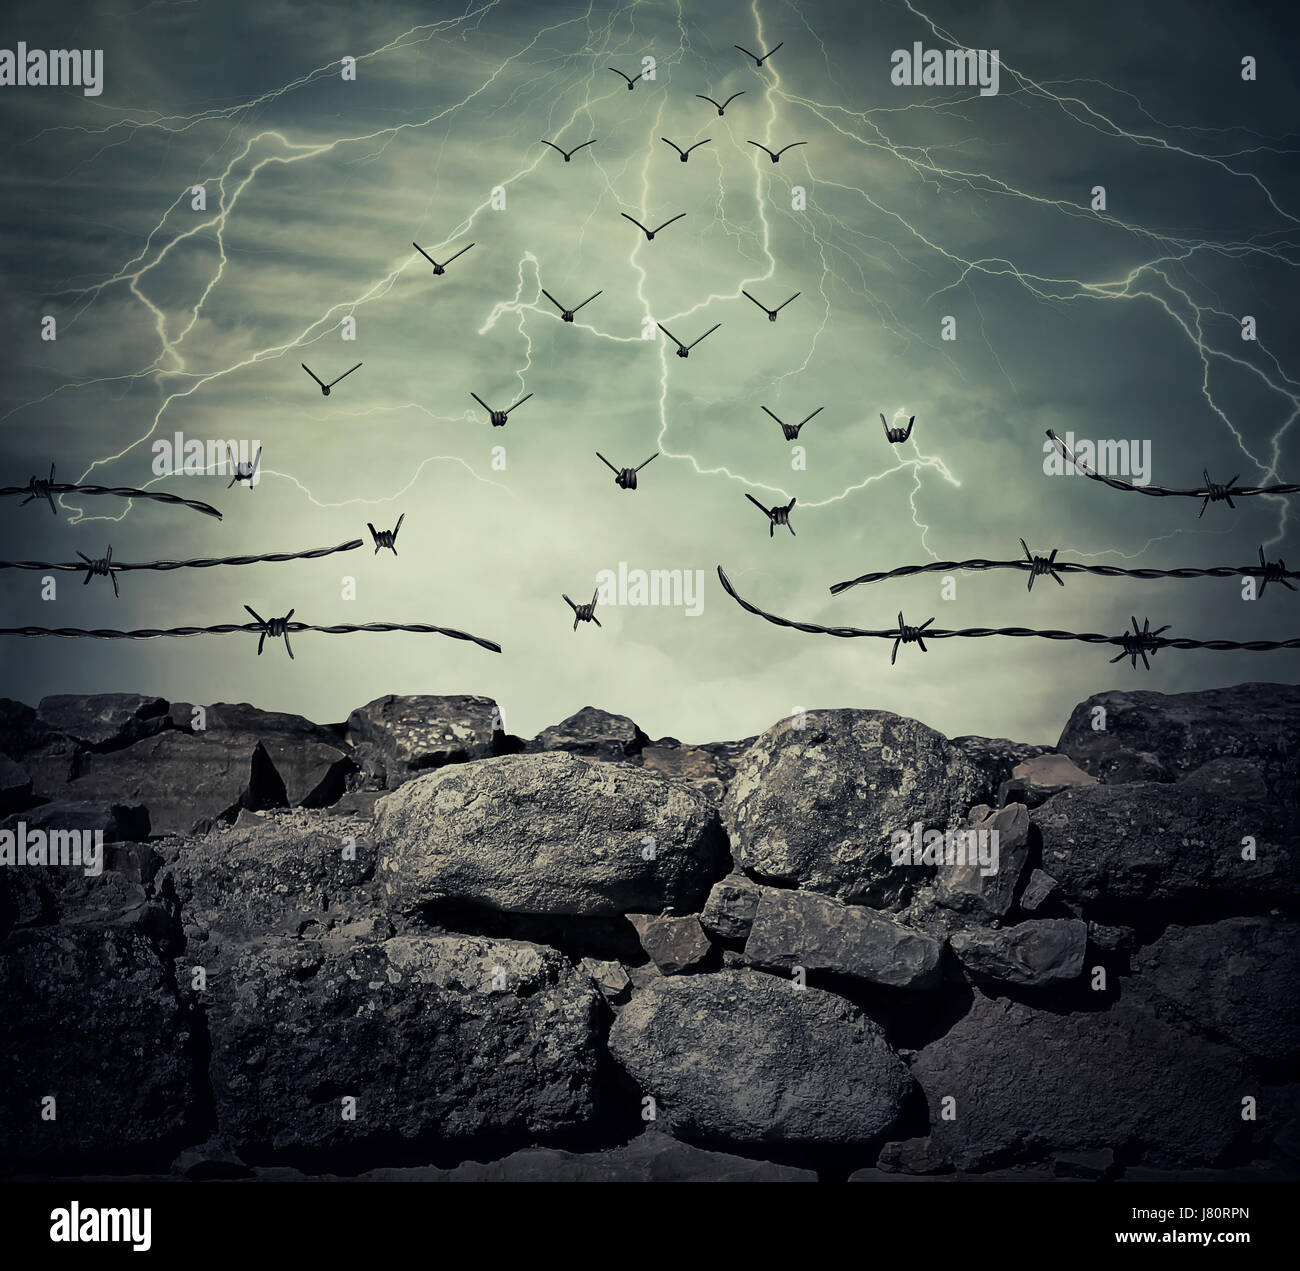 Stone wall fence of a prison with barbed metallic wire on top transform into flying birds over the lightning sky background. Freedom and success conce Stock Photo